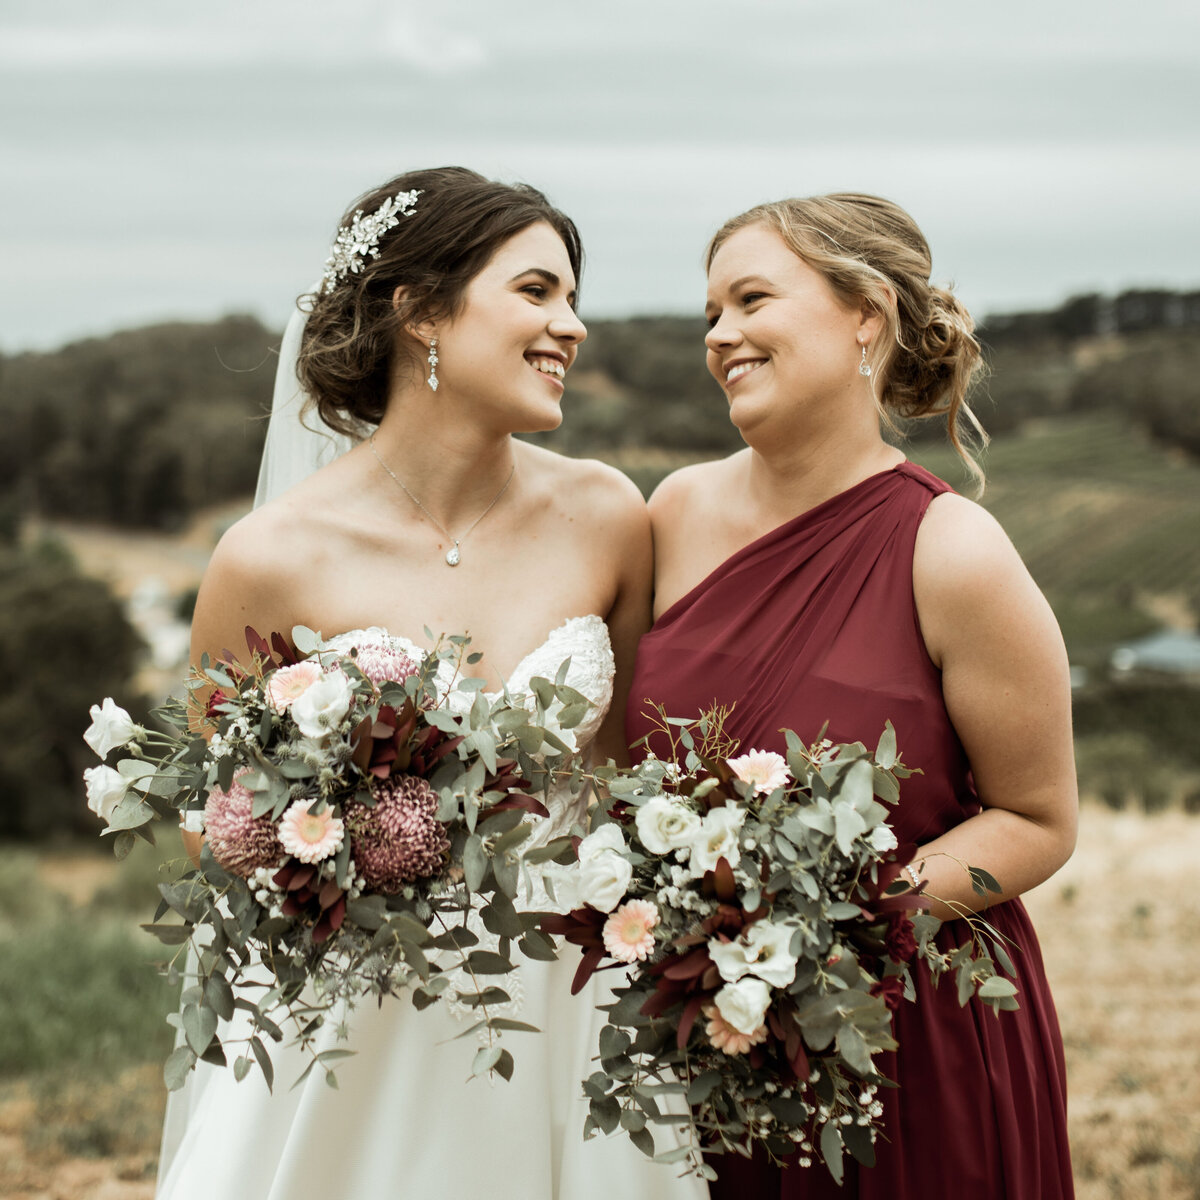 M&R-Anderson-Hill-Rexvil-Photography-Adelaide-Wedding-Photographer-235